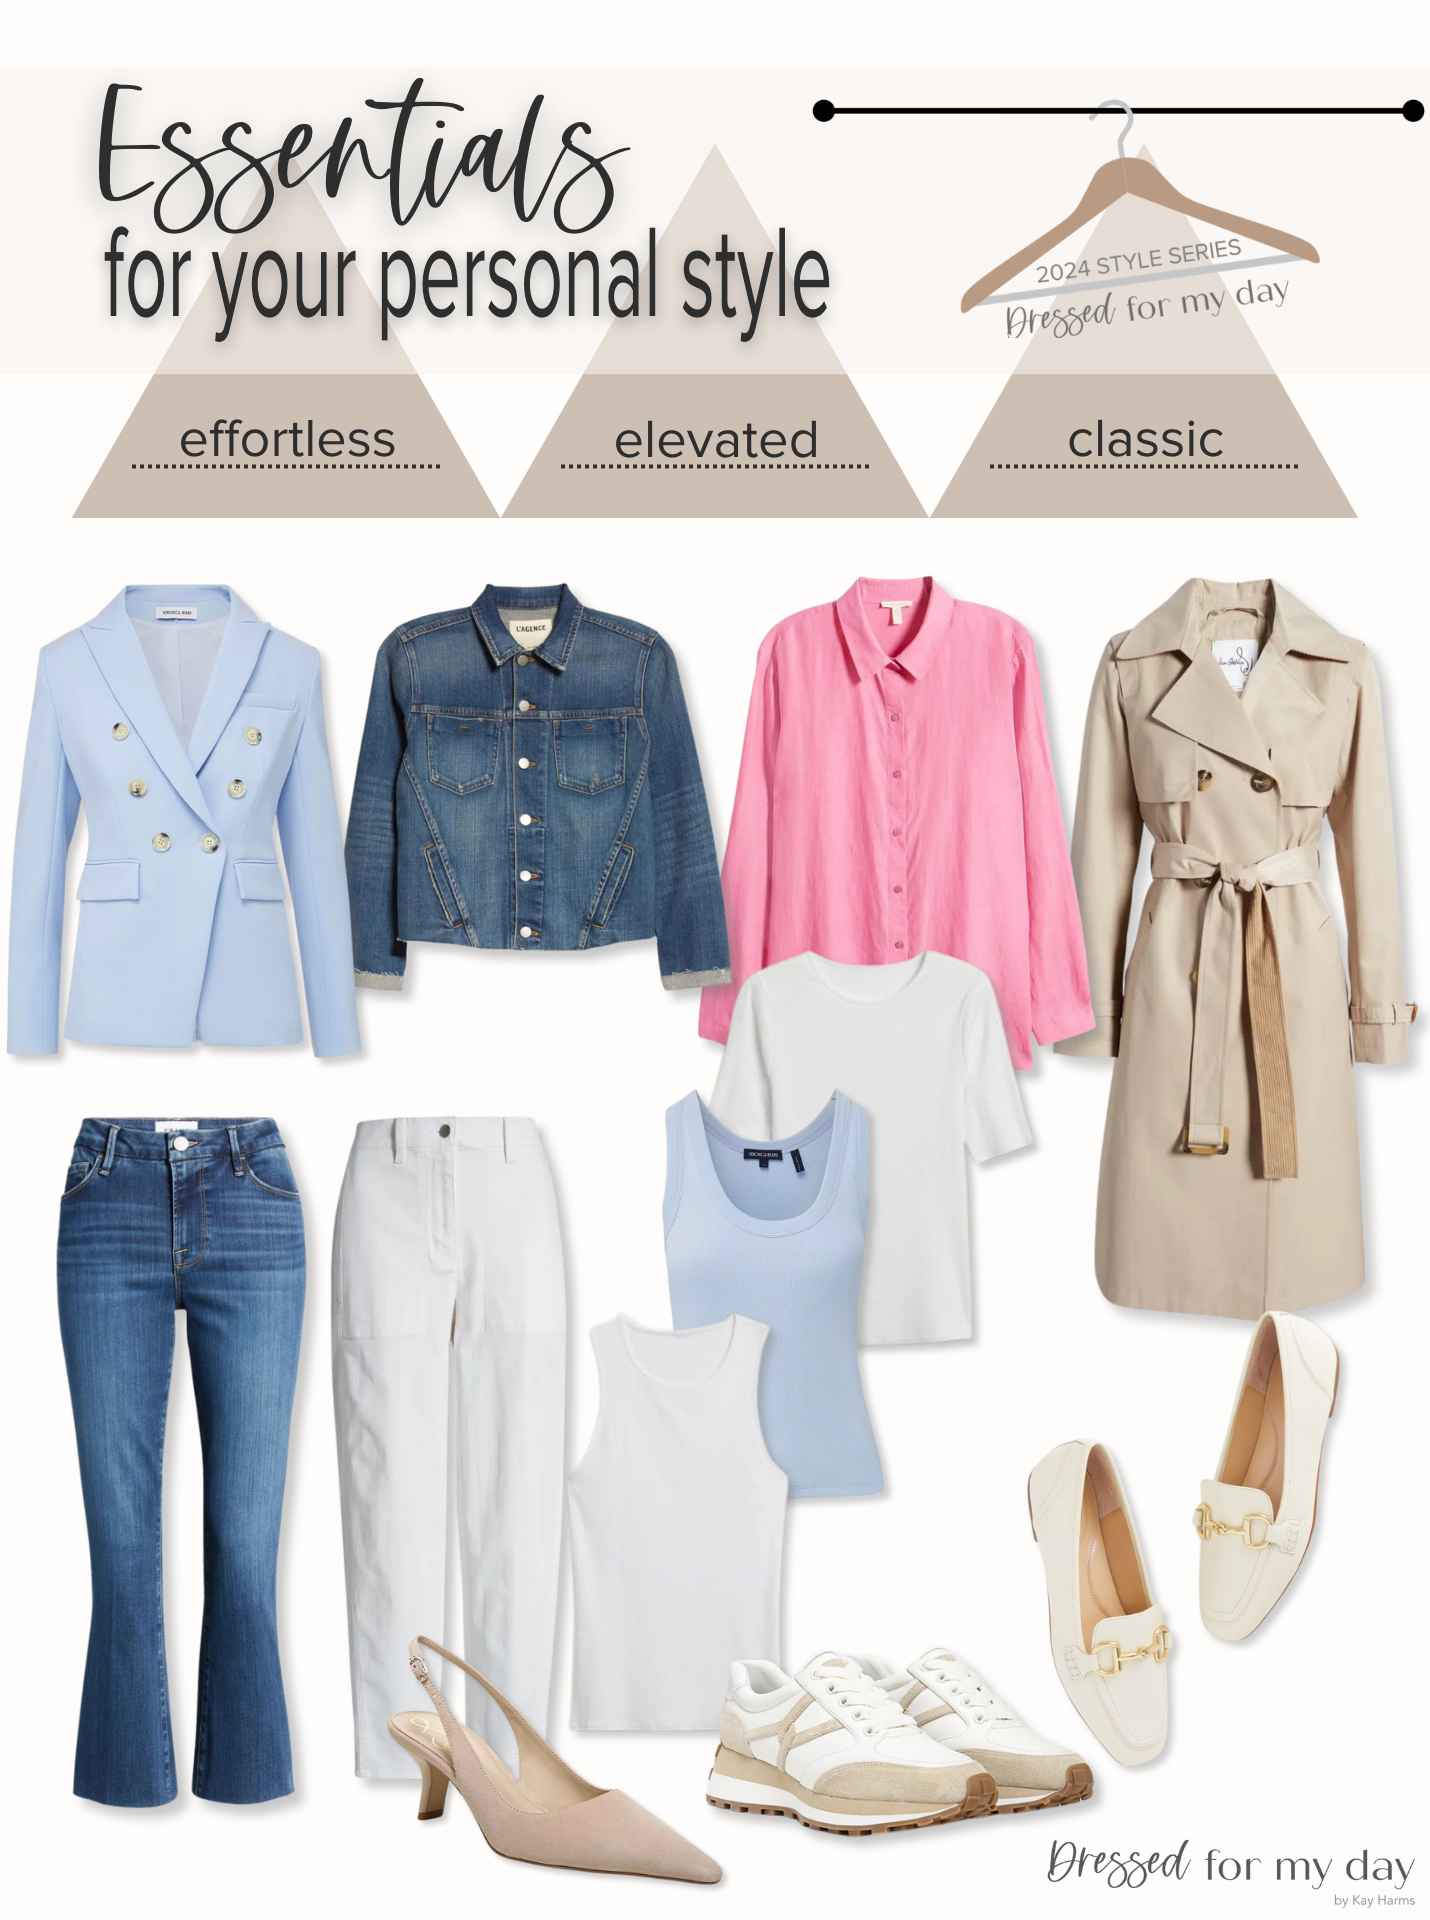 ssentials for Personal Styles 1